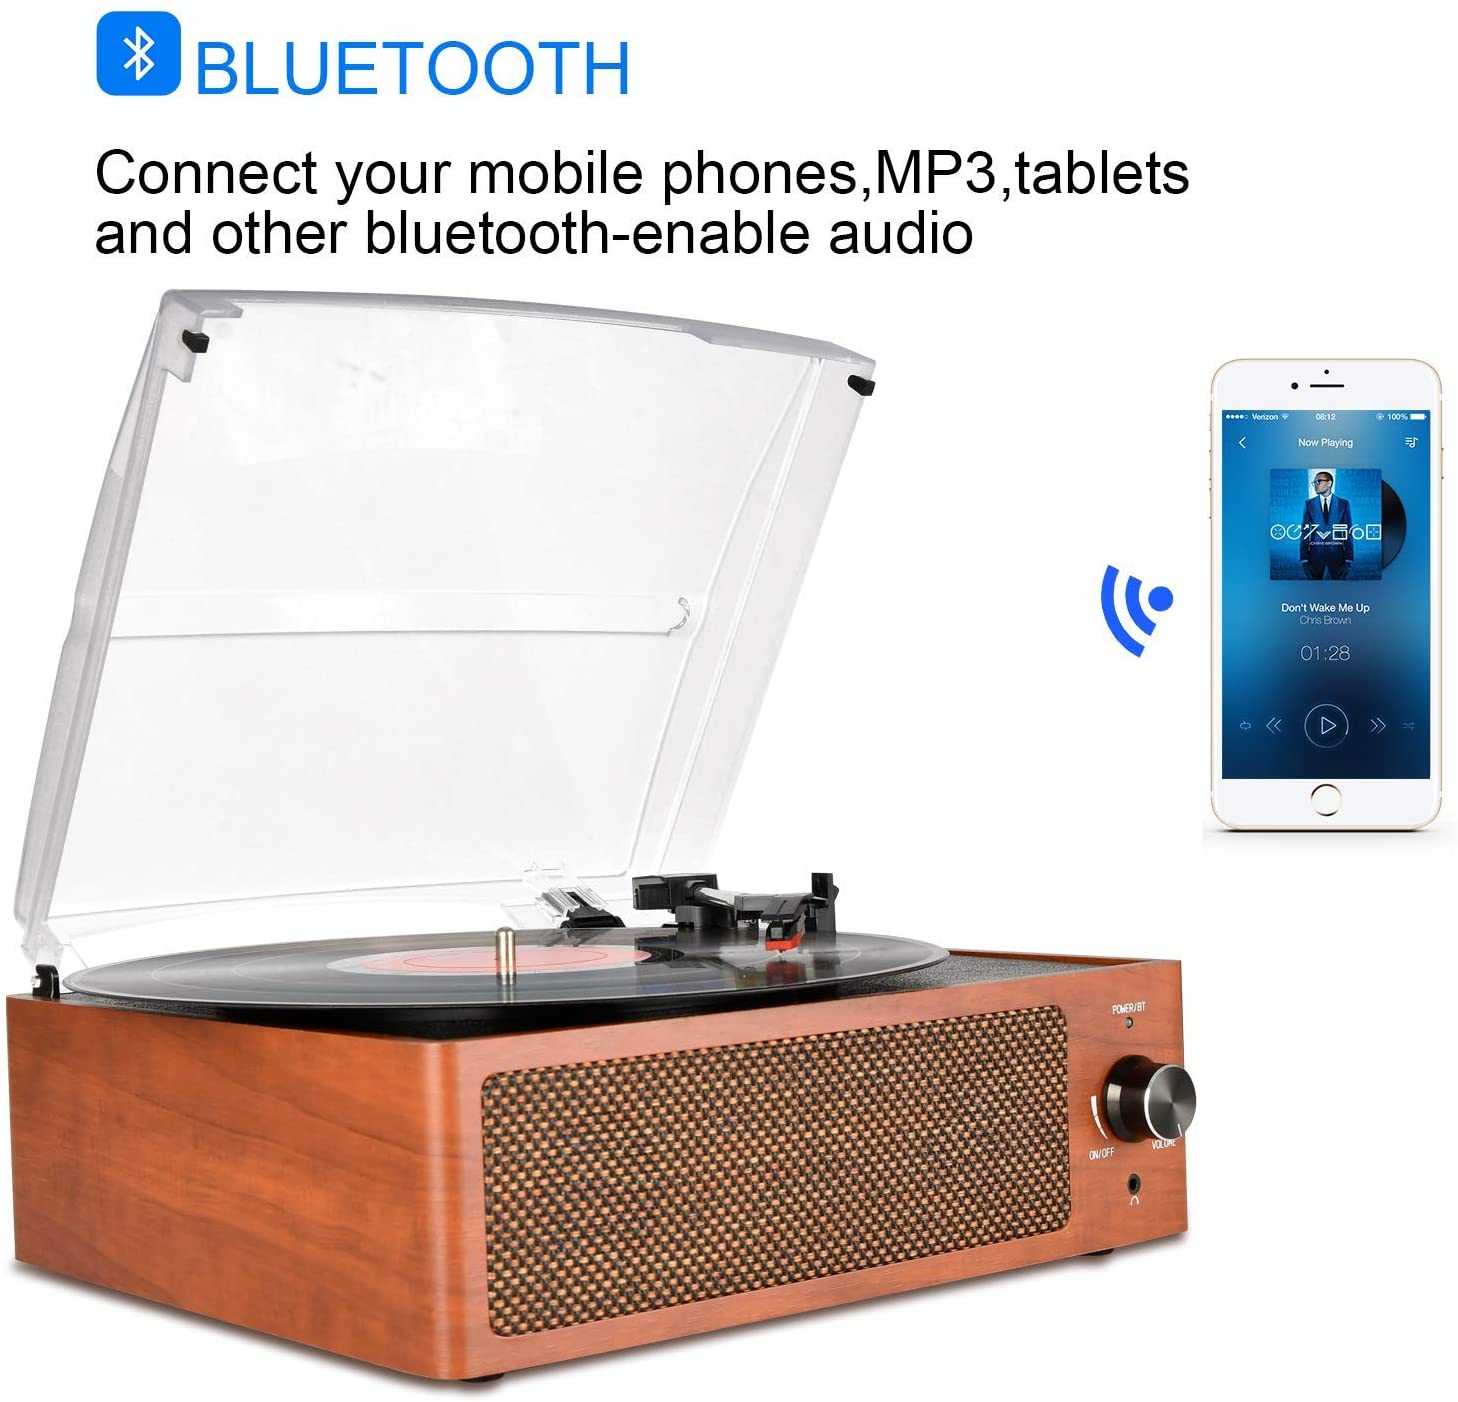 DIGITNOW Bluetooth Record Player Belt-Driven 3-Speed Turntable, Vintage Vinyl Record Players Built-in Stereo Speakers, with Headphone Jack/ Aux Input/ RCA Line Out, Wooden